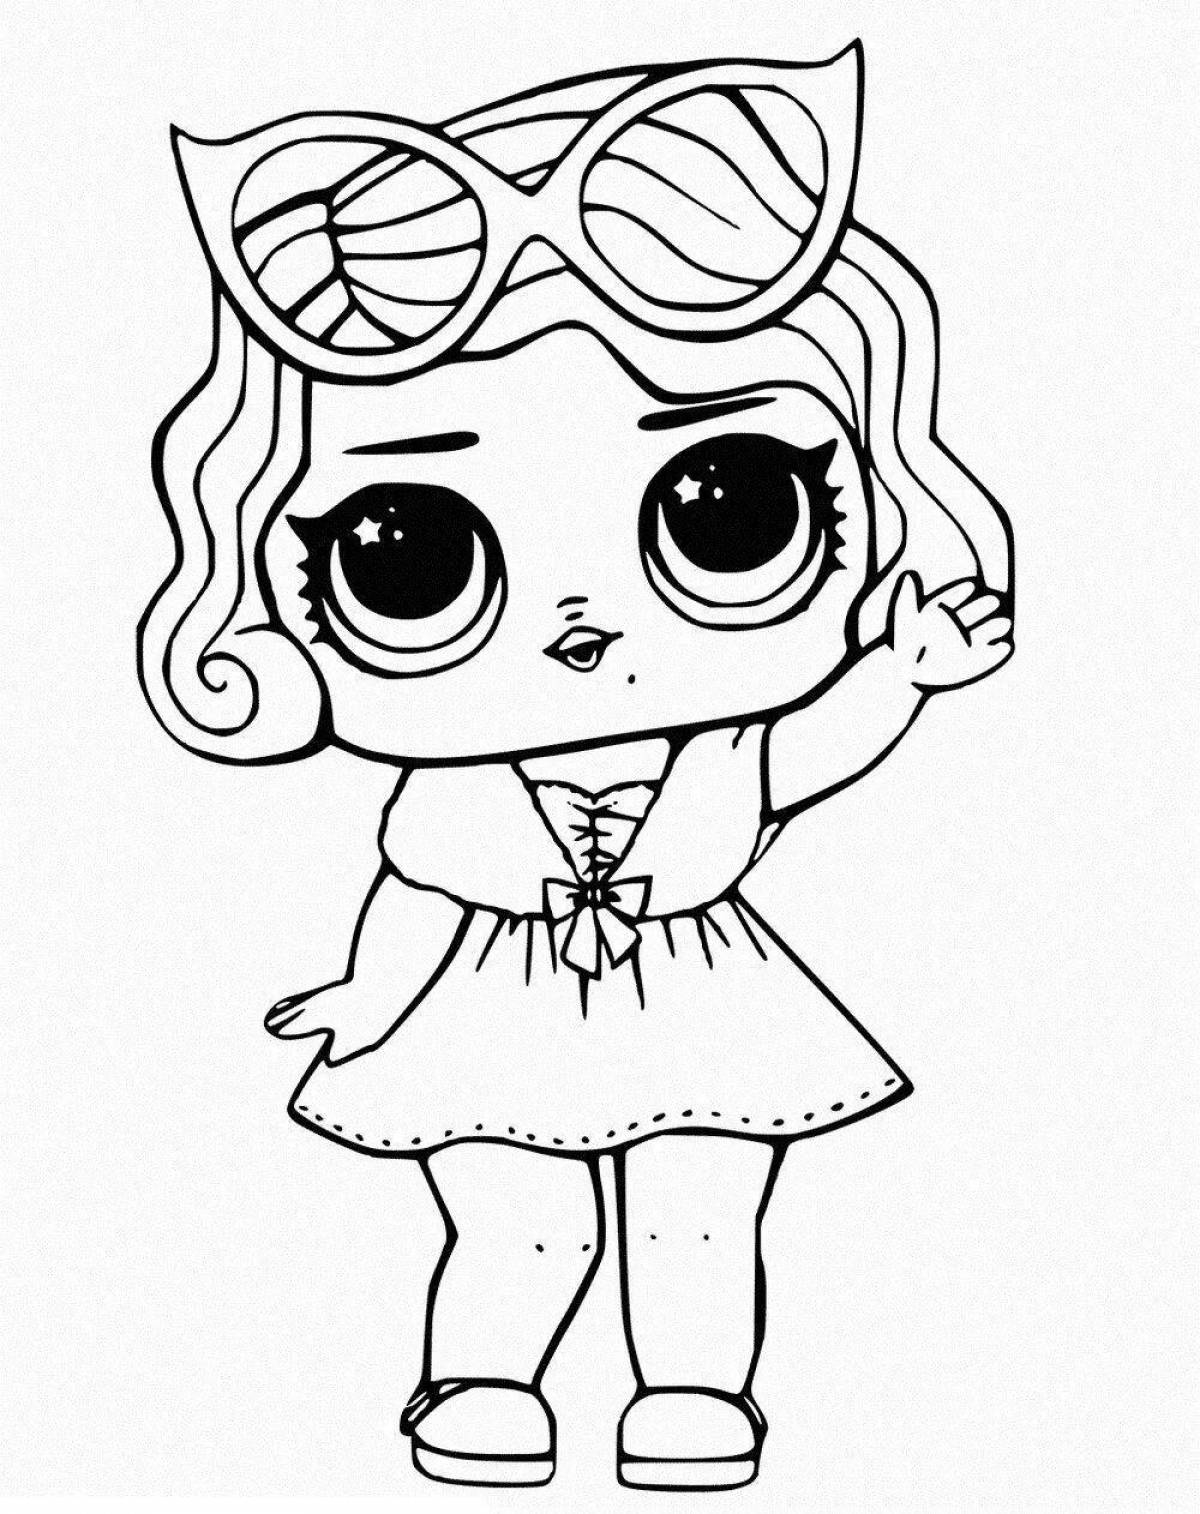 Exquisite doll girl coloring book